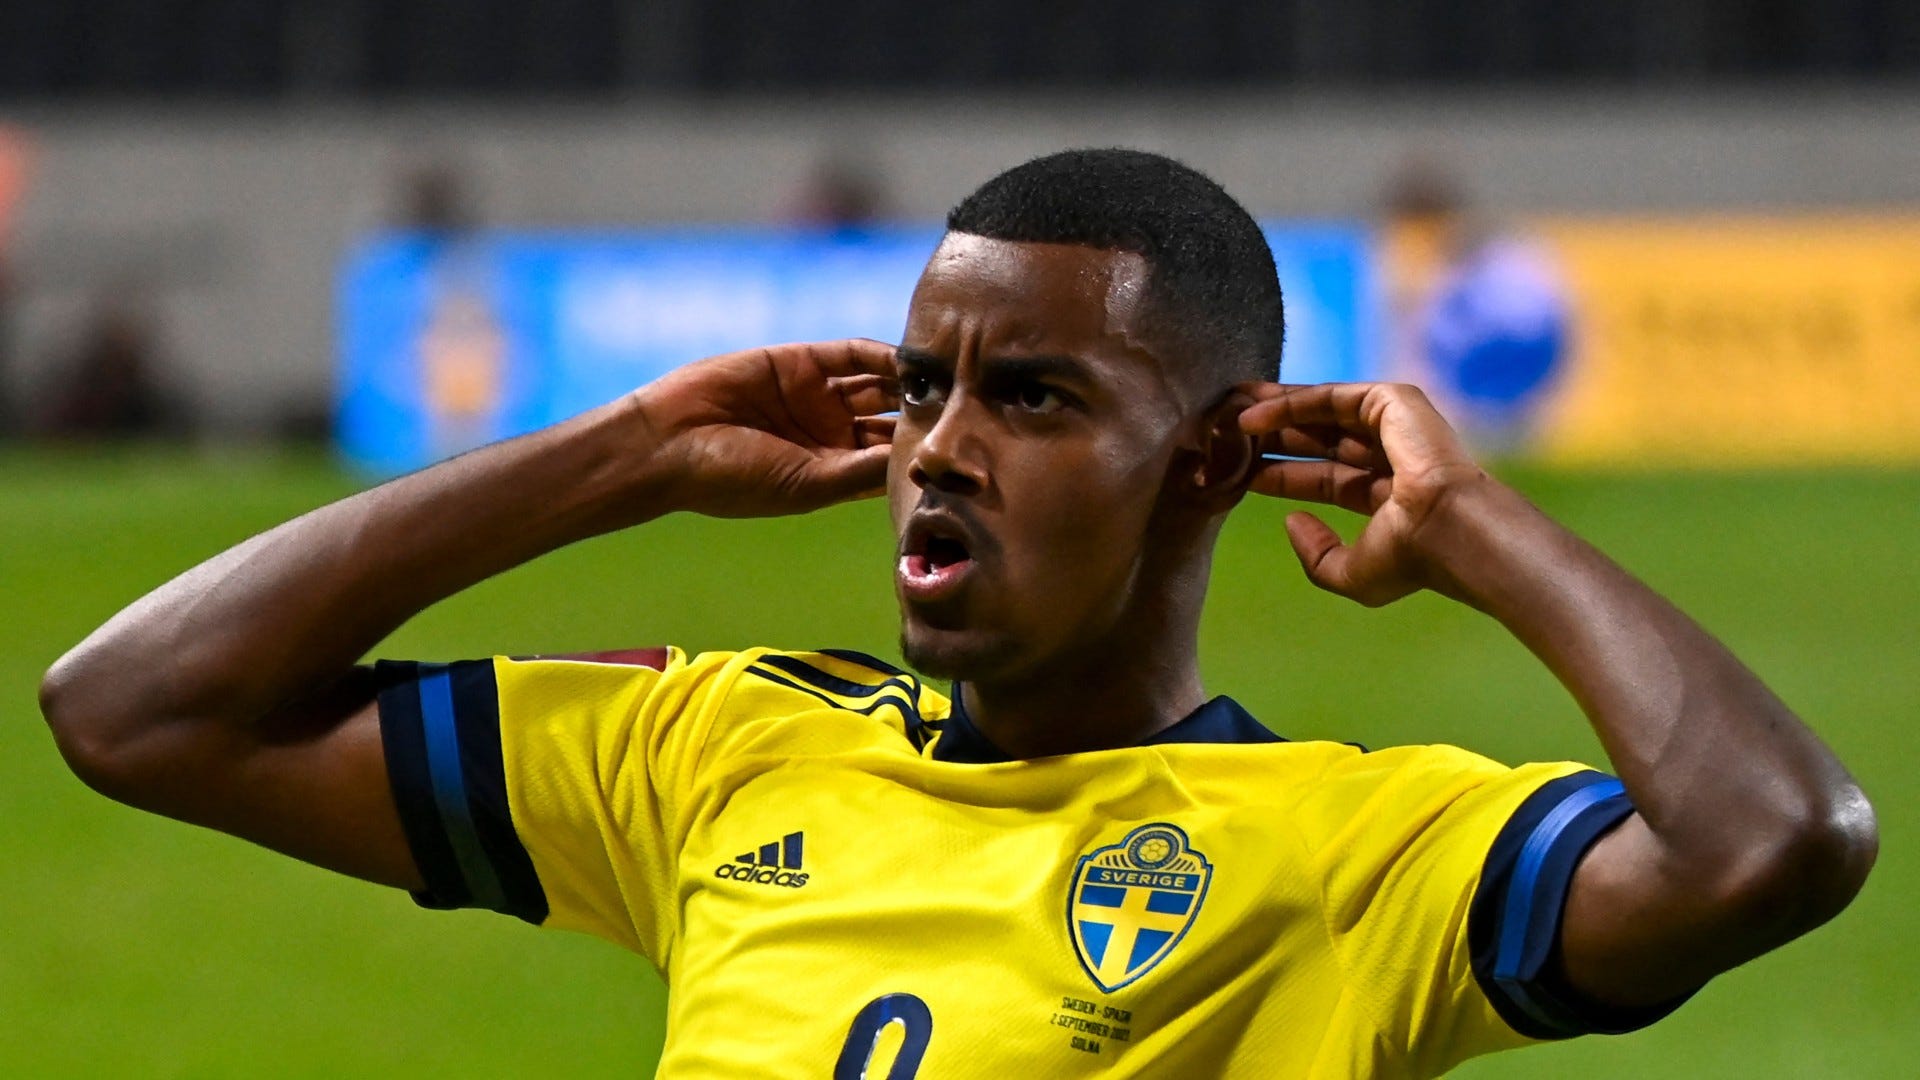 Sweden vs Slovenia Live stream, TV channel, kick-off time and how to watch Goal US